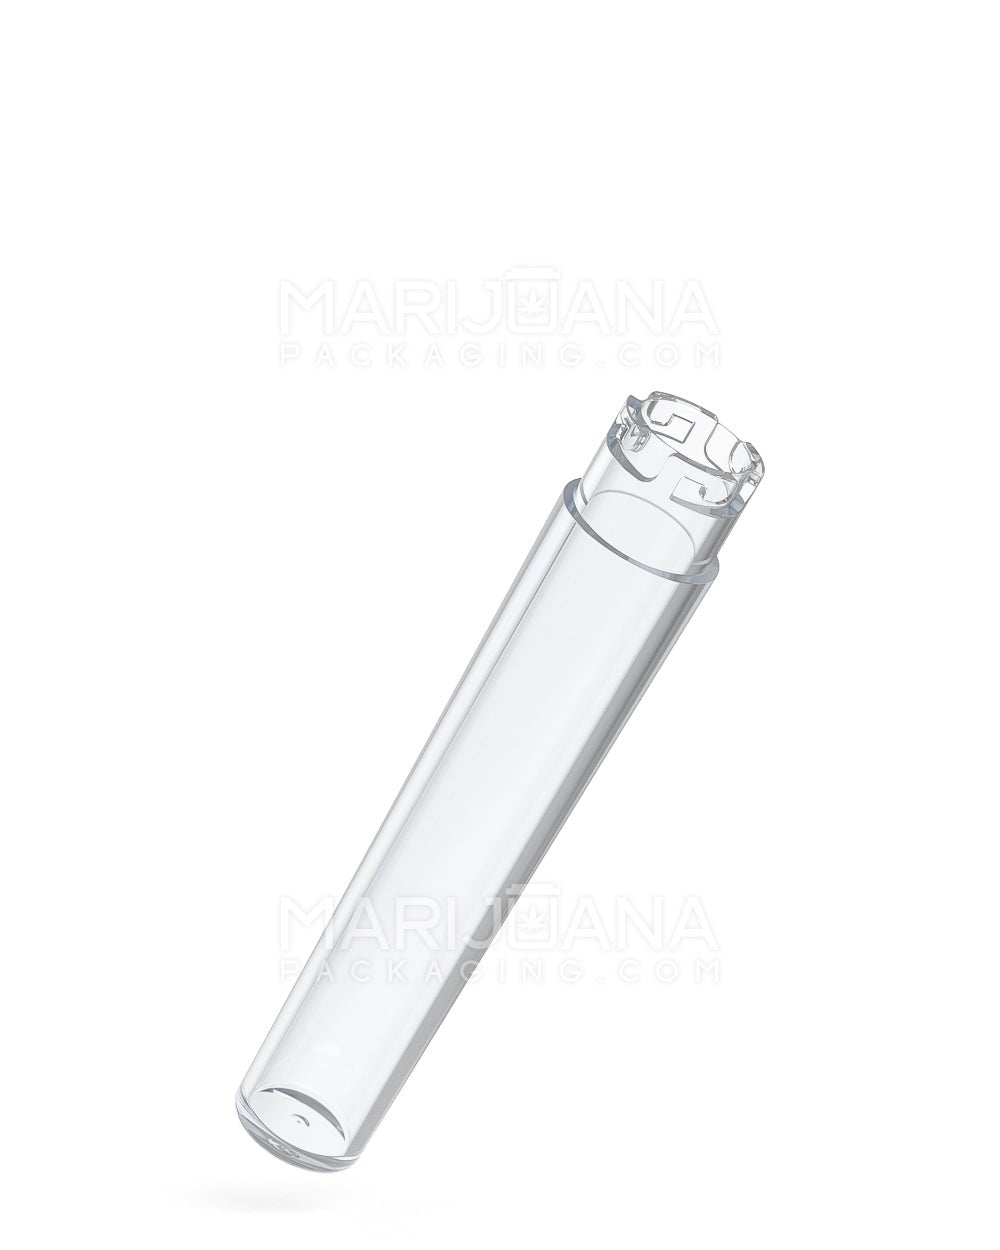 POLLEN GEAR | Five10 Child Resistant Push Down & Turn Wide Long Universal Plastic Caps for Vape Tube | 155mm - Clear - 700 Count - 1